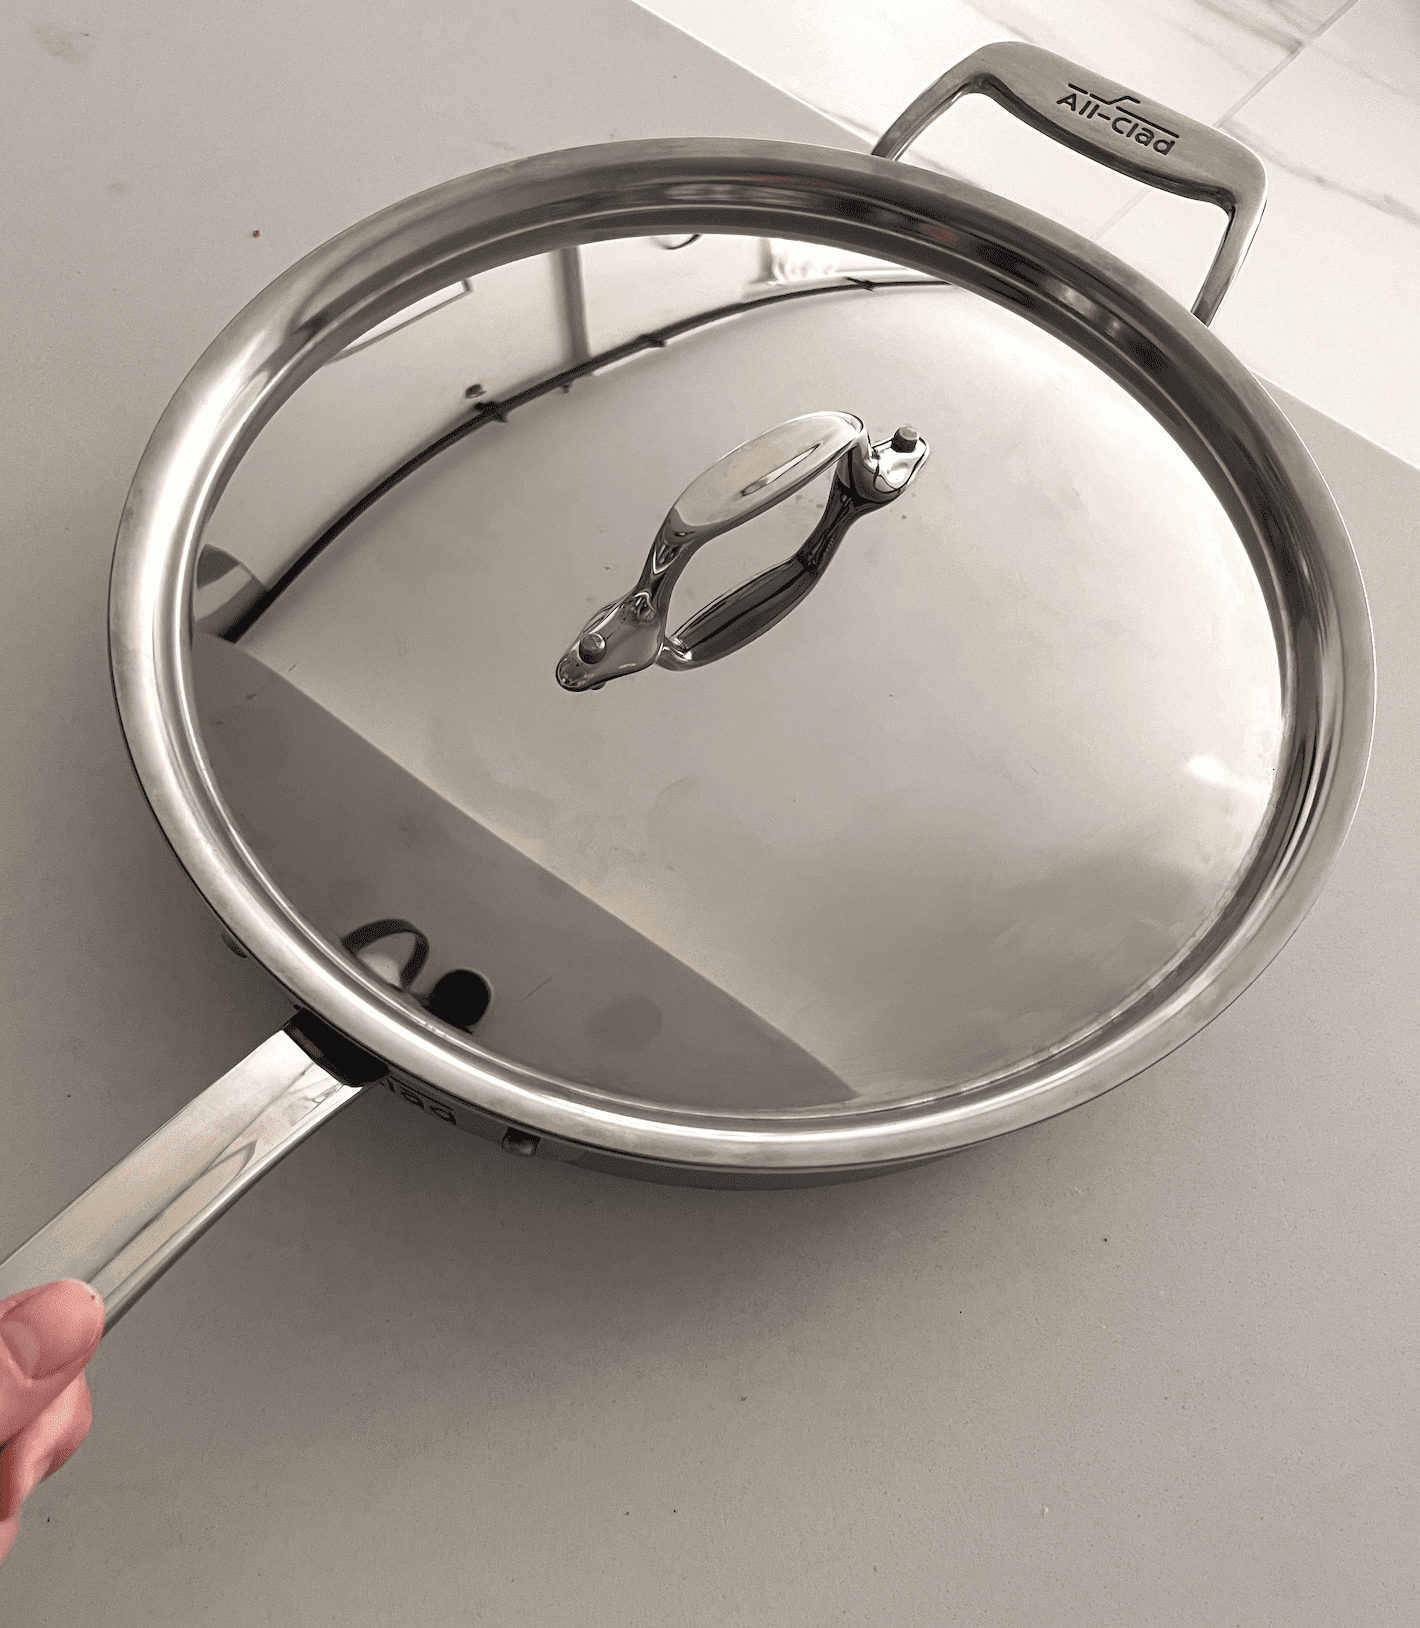 All-Clad SAUTE PAN REVIEW - All-Clad D3 Stainless Saute Pan Review